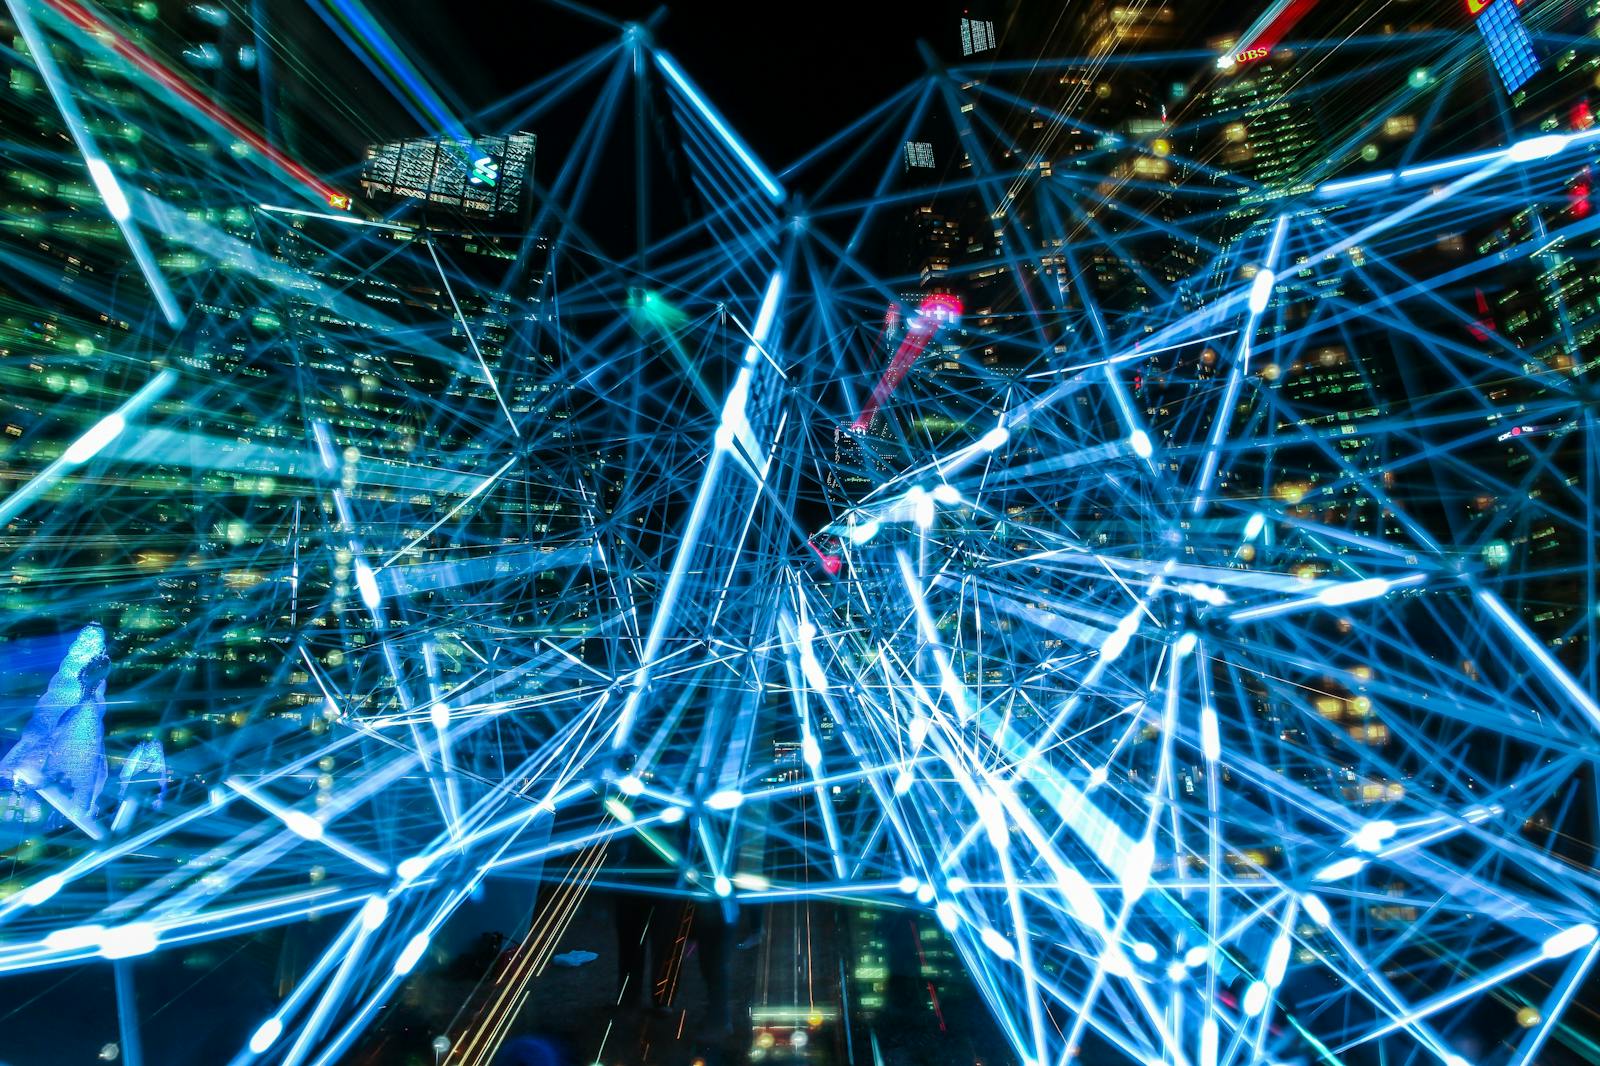 Artificial Intelligence Photo by Pixabay from Pexels: https://www.pexels.com/photo/blue-bright-lights-373543/